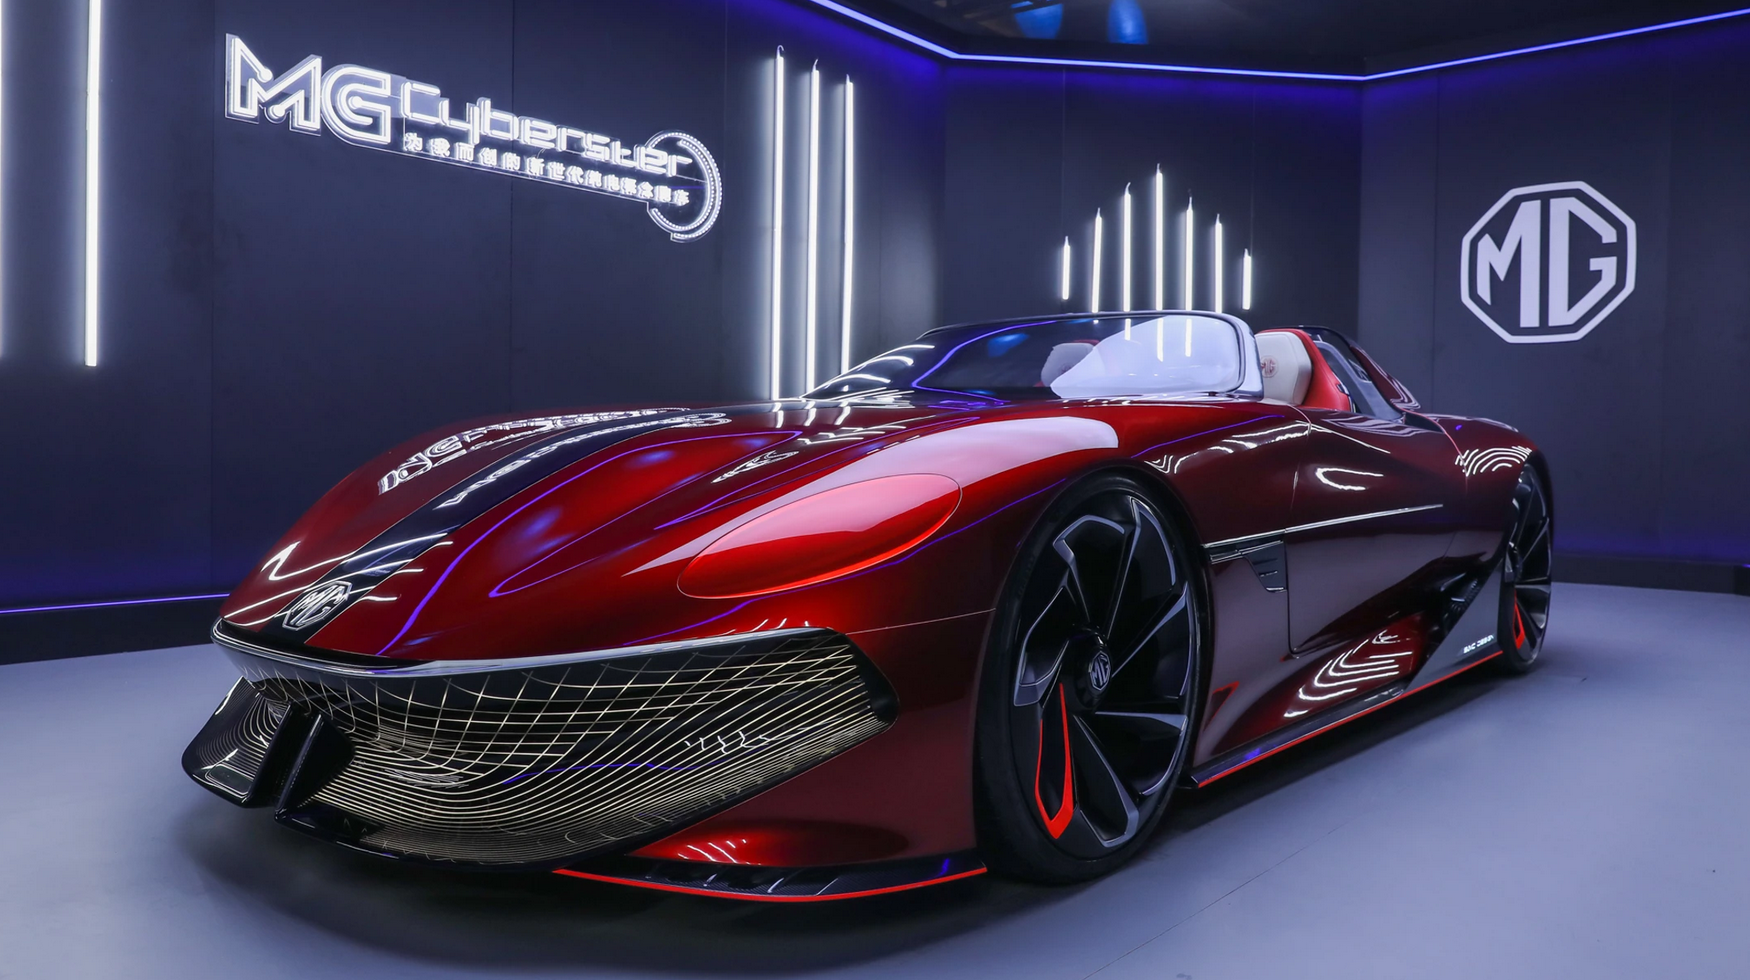 MG shows Cyberster concept car